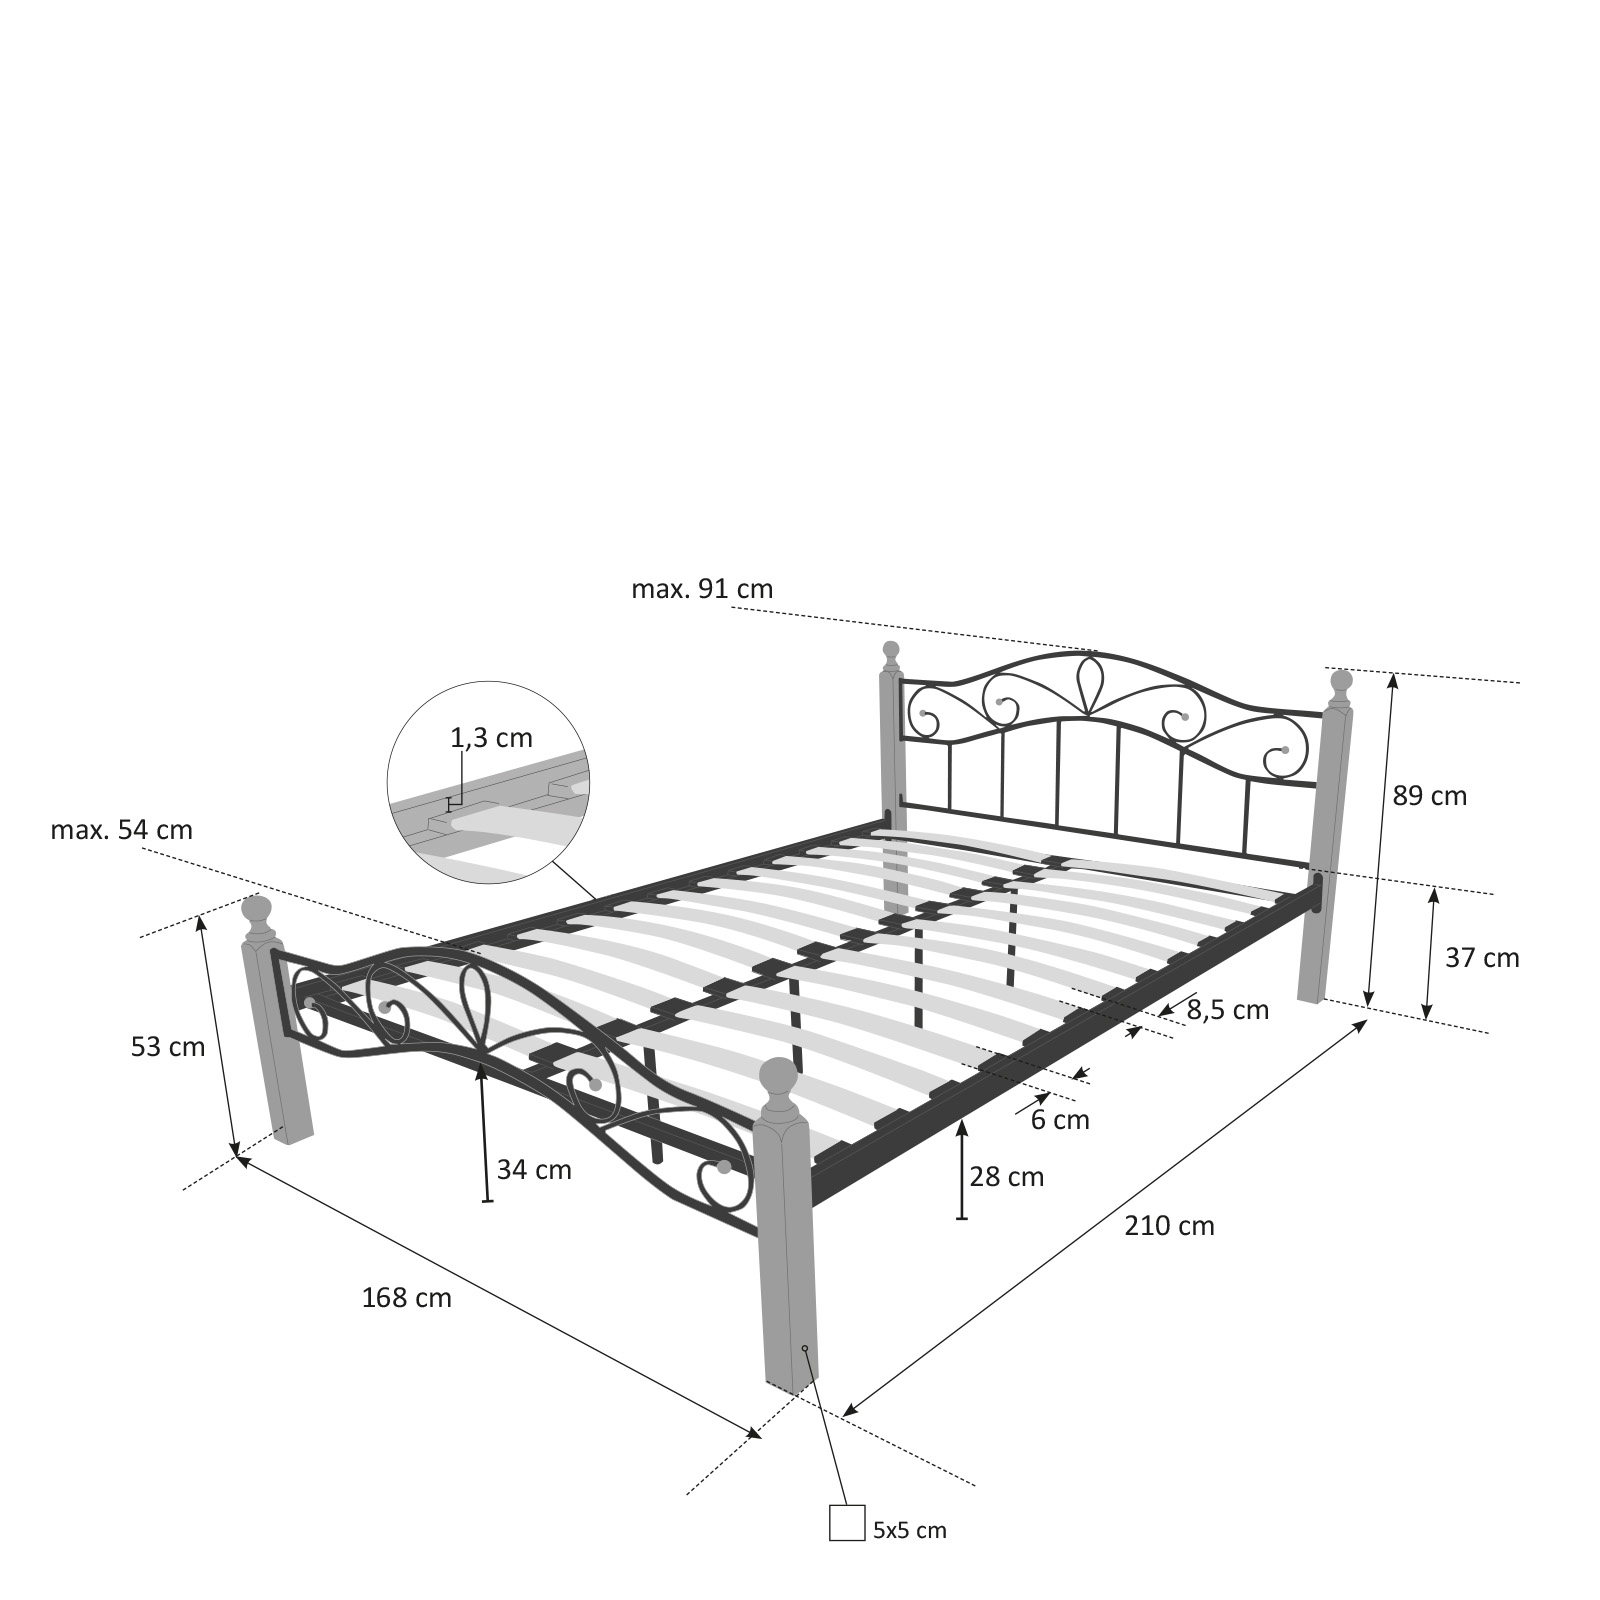 Metal Bed Iron Bed Double 160 x 200 Wood Slatted black brown bed frame 920